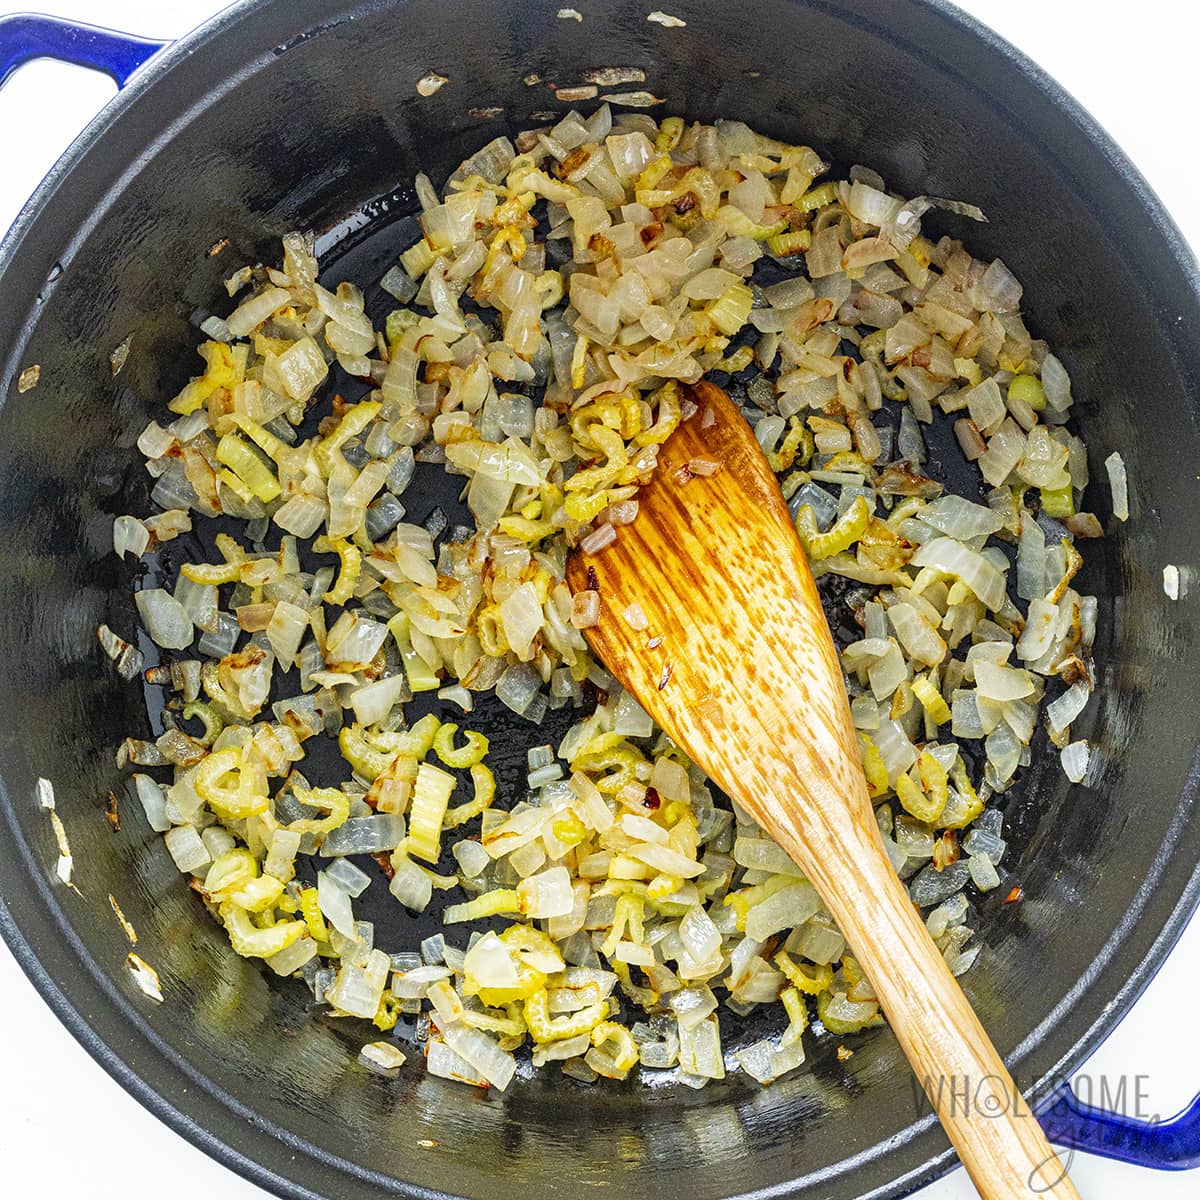 Sauteed onion and celery in a Dutch oven with a wooden spoon.